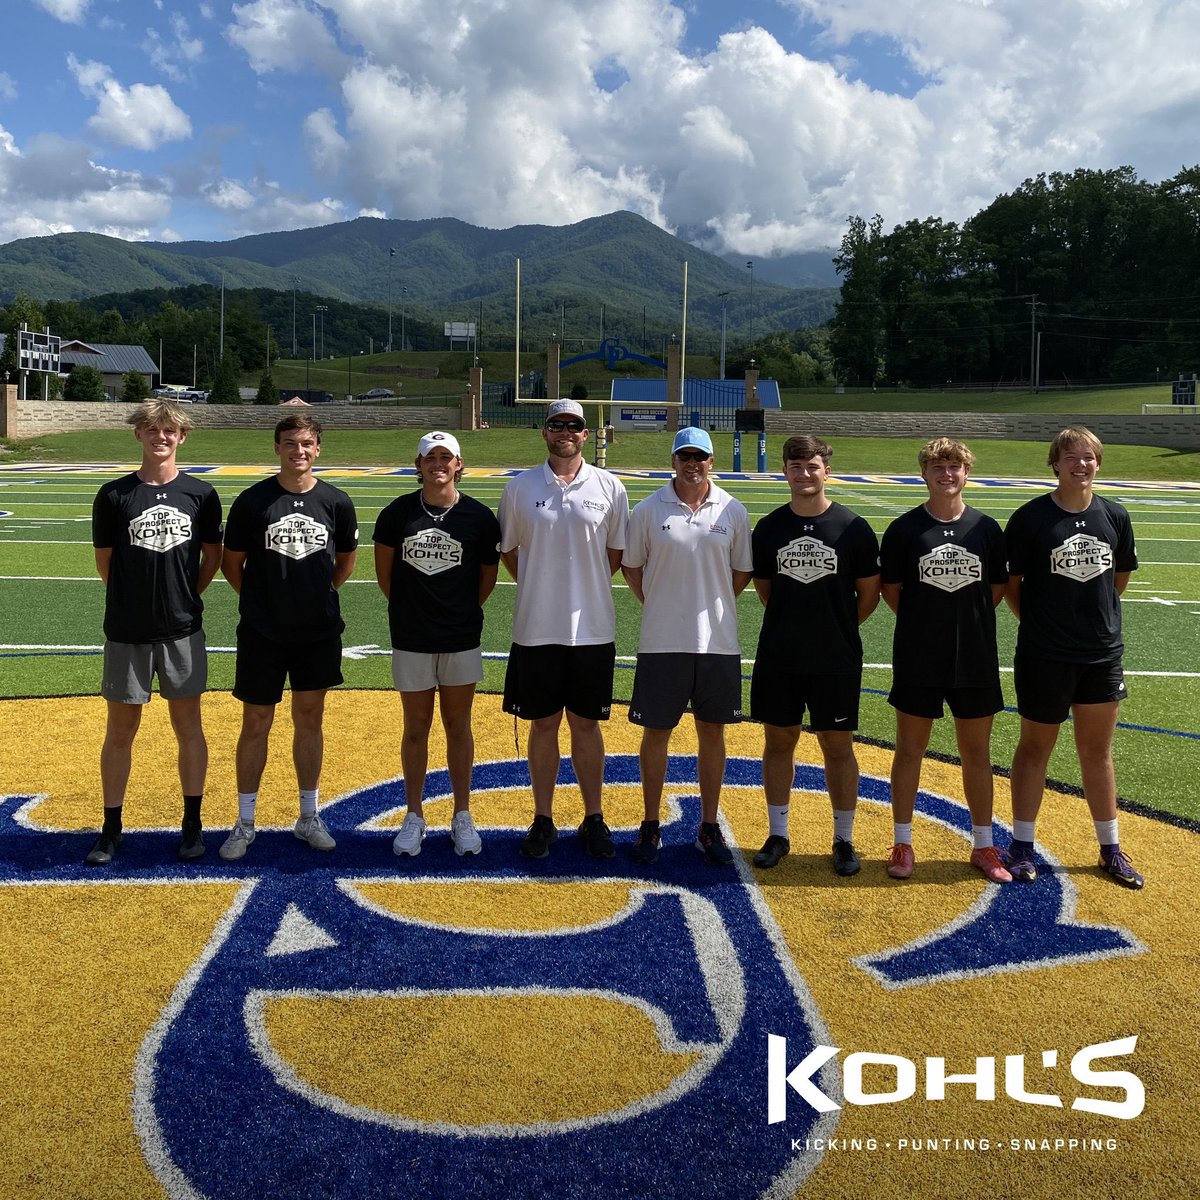 THANK YOU to everyone who attended the @KohlsSnapping Scholarship, Elite and Pro Division Camps. Special thank you to @BlaineSiddersJr @NickSundberg and @HunterB_53 for all you do. Im grateful and honored to work with all of you. #KohlsSnapping // #KohlsStandard